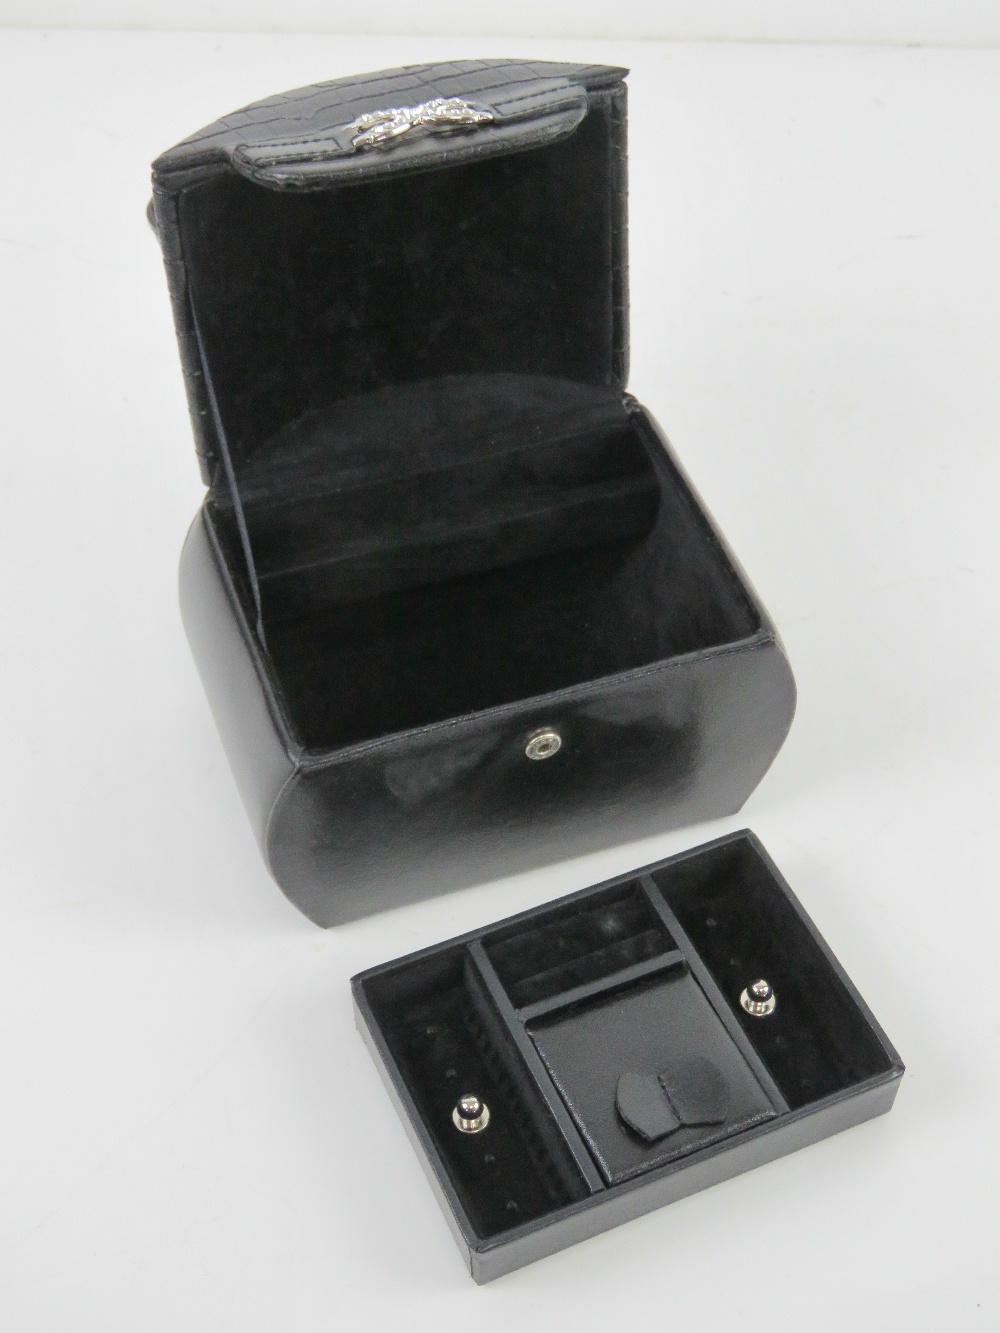 A contemporary black leather jewellery case having various compartments within. 15 x 10.5 x 21cm. - Image 2 of 2